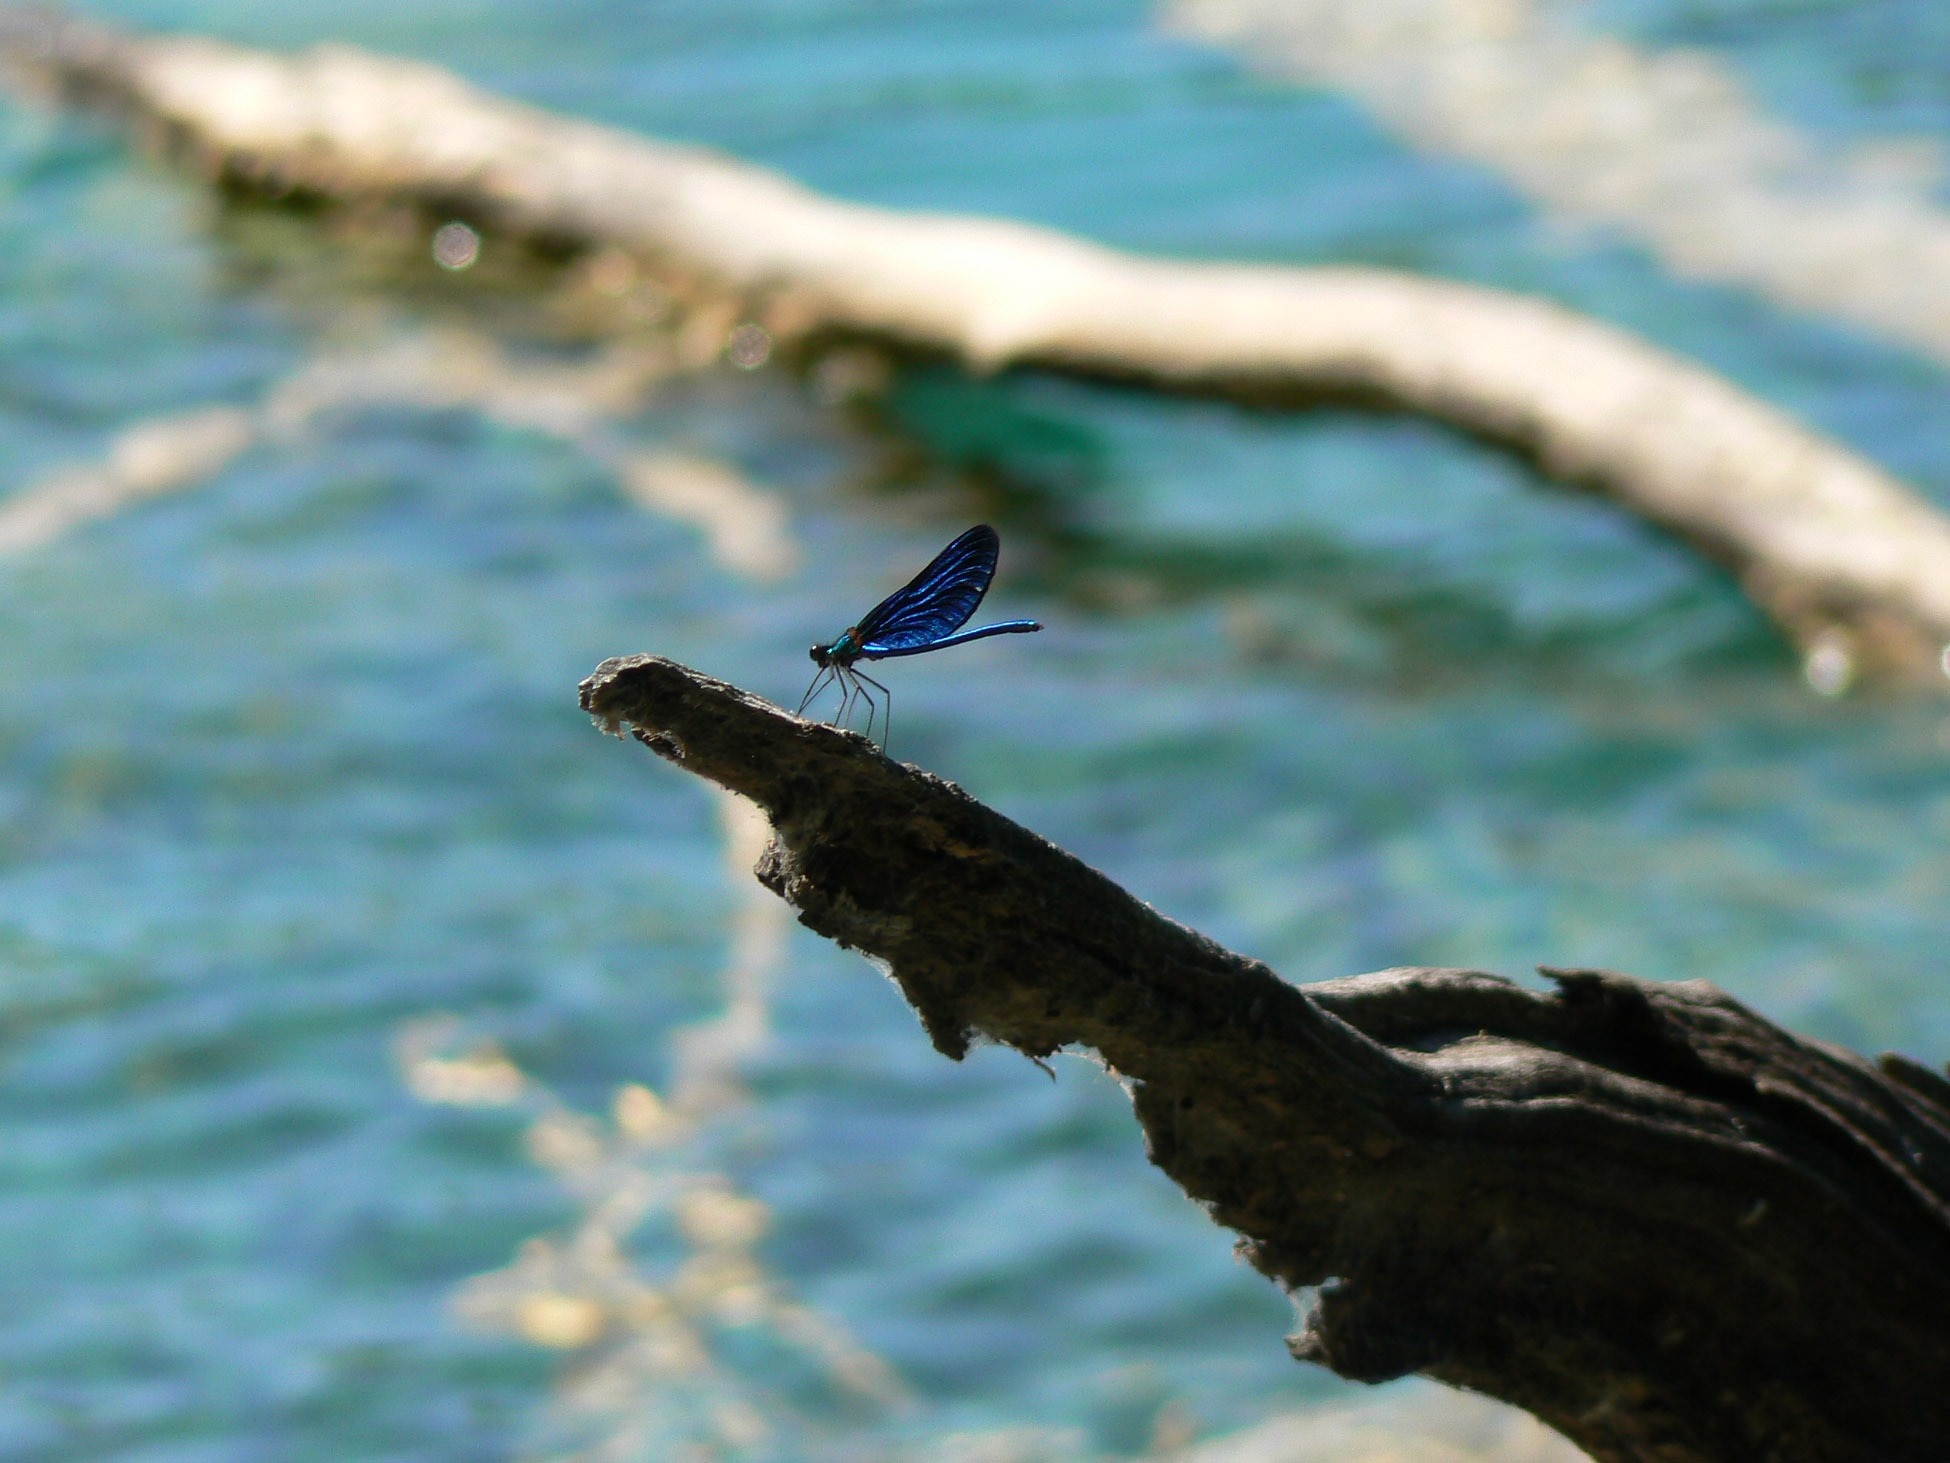 Blue, Fragility, Dragonfly, Insect, animals in the wild, bird